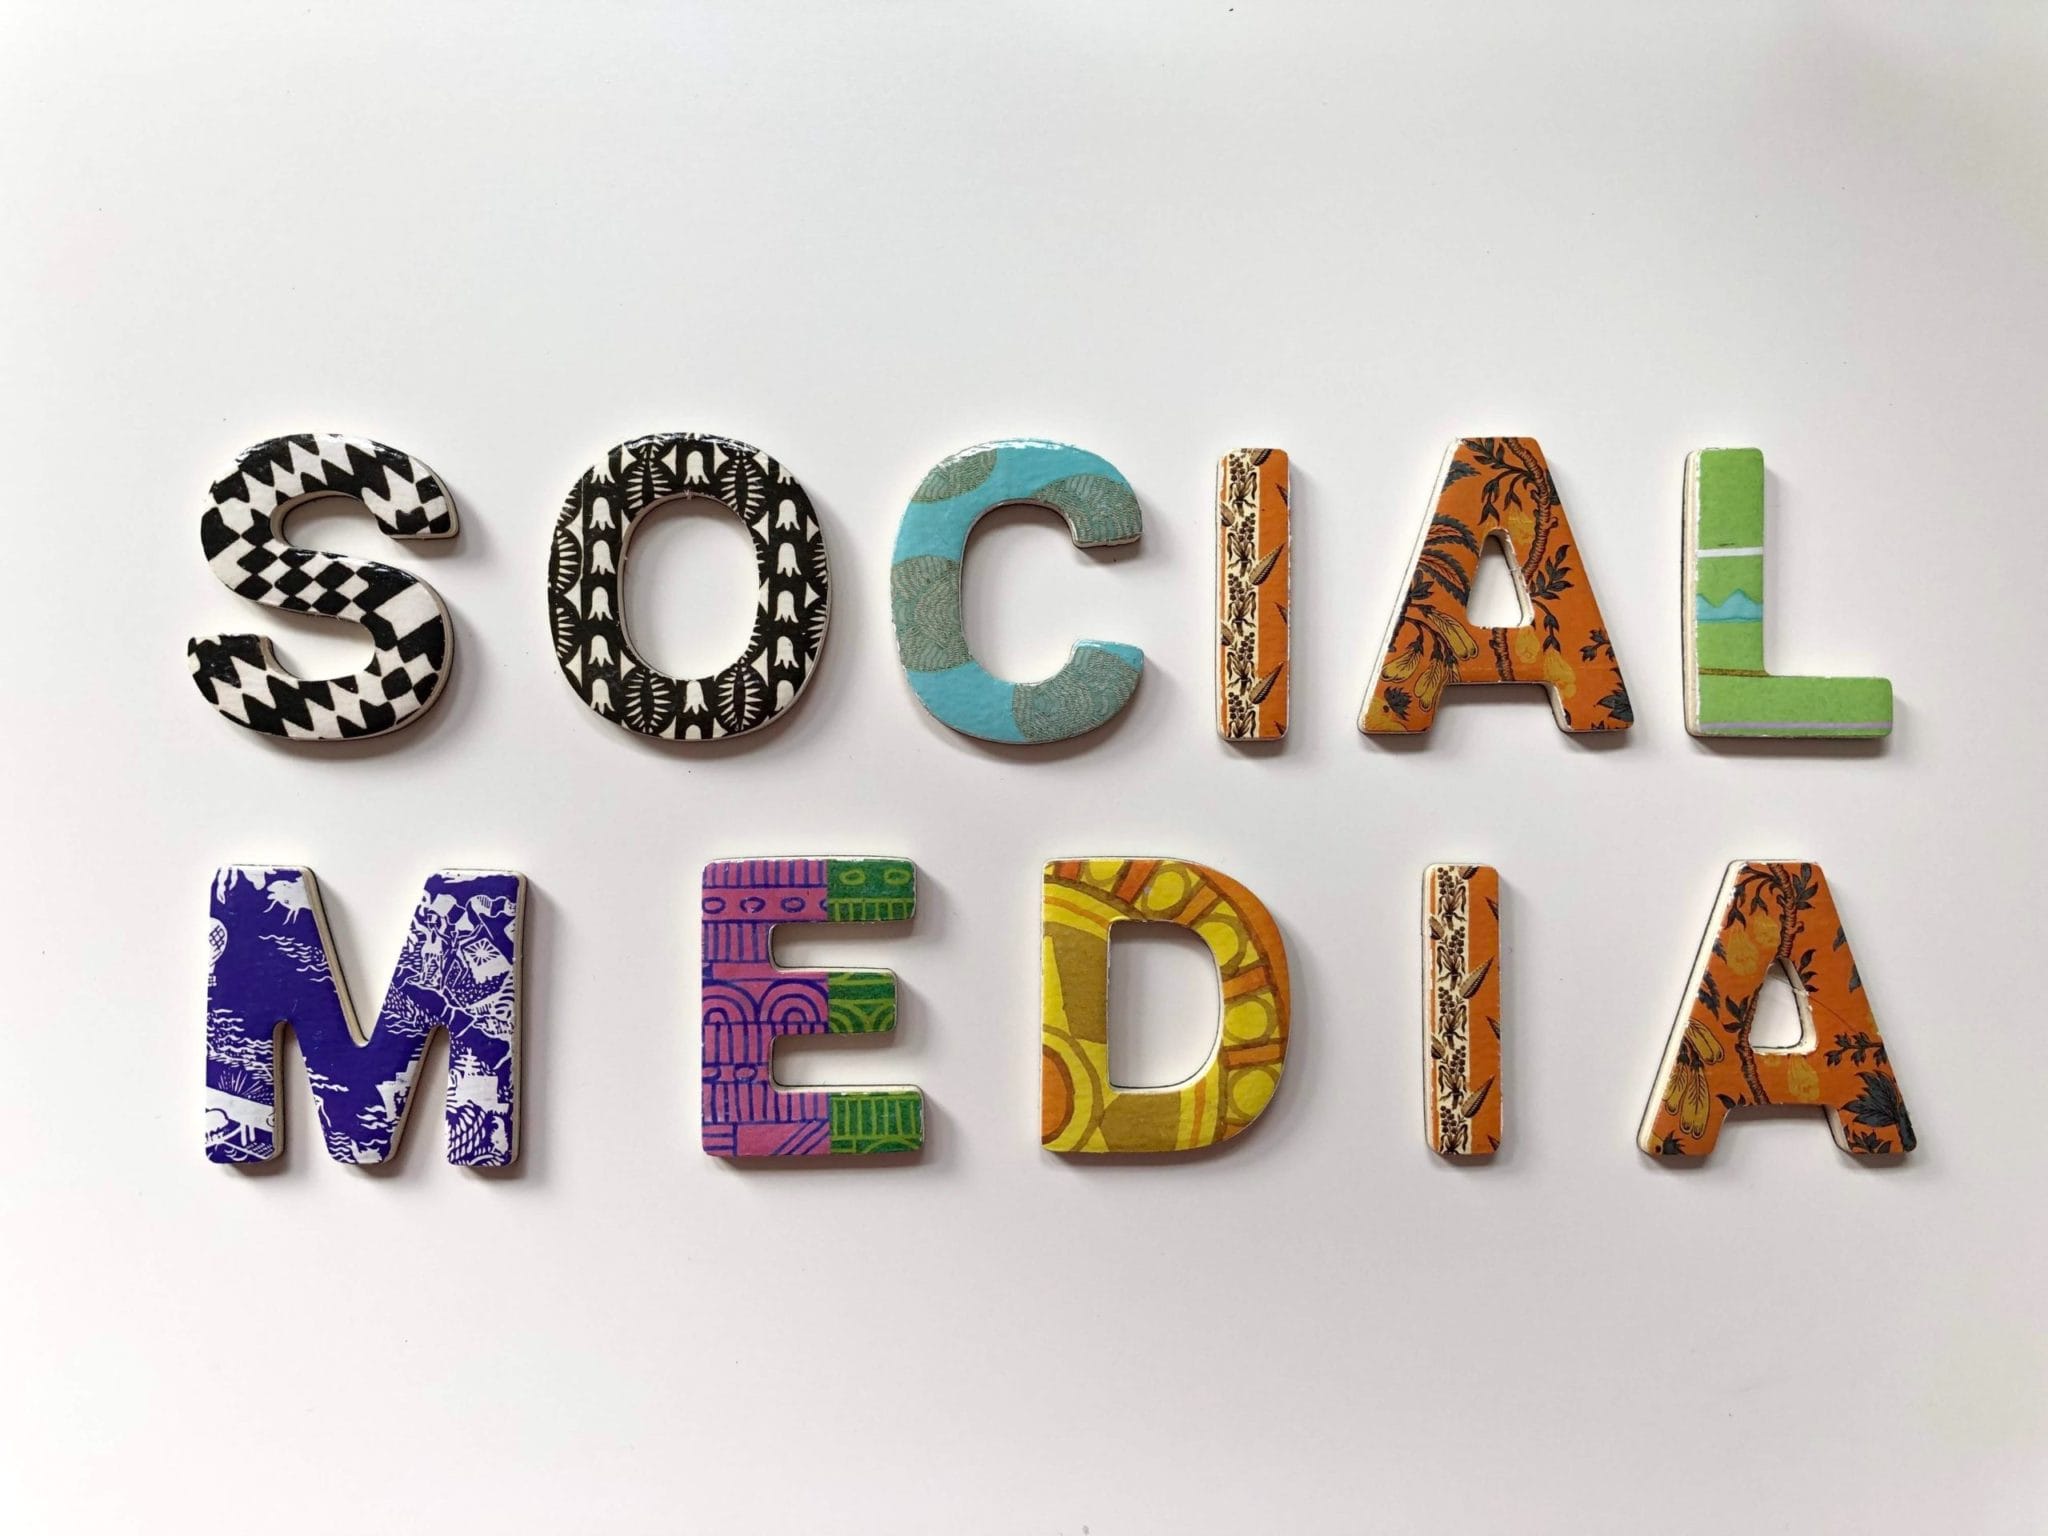 Questions to Boost Your Social Media Marketing - Sachs Marketing Group